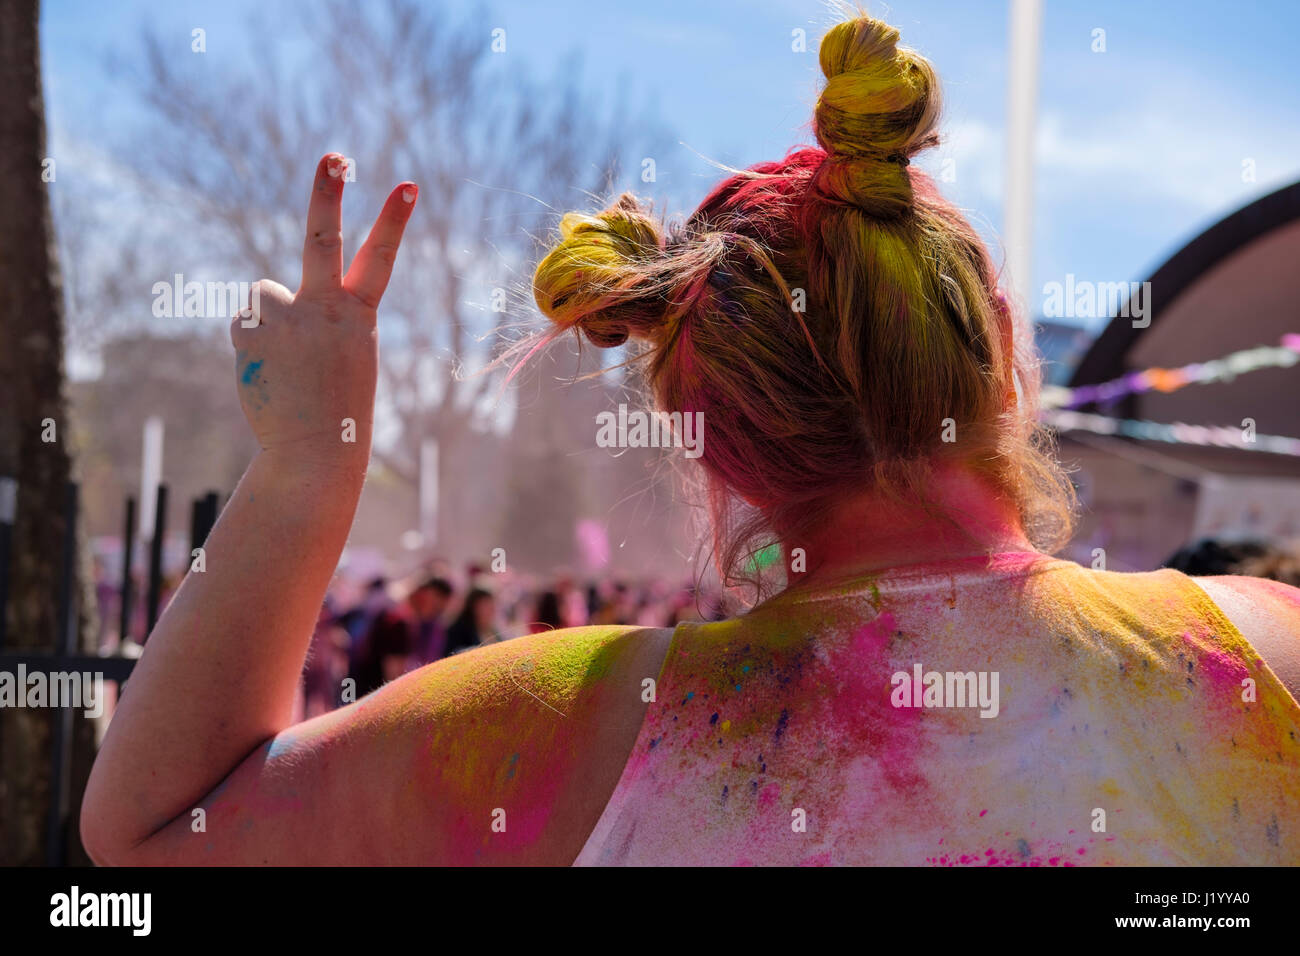 London, Ontario, Canada, 22nd Apr, 2017. Back of a young woman making the peace sign at Victoria Park during the Holi Spring Festival, also known as Rangwali Holi, Dhuleti, Dhulandi, Phagwah, or simply as Festival of Colours, an Hindu festival to celebrate the arrival of Spring in London, Ontario, Canada. Credit: Rubens Alarcon/Alamy Live News. Stock Photo